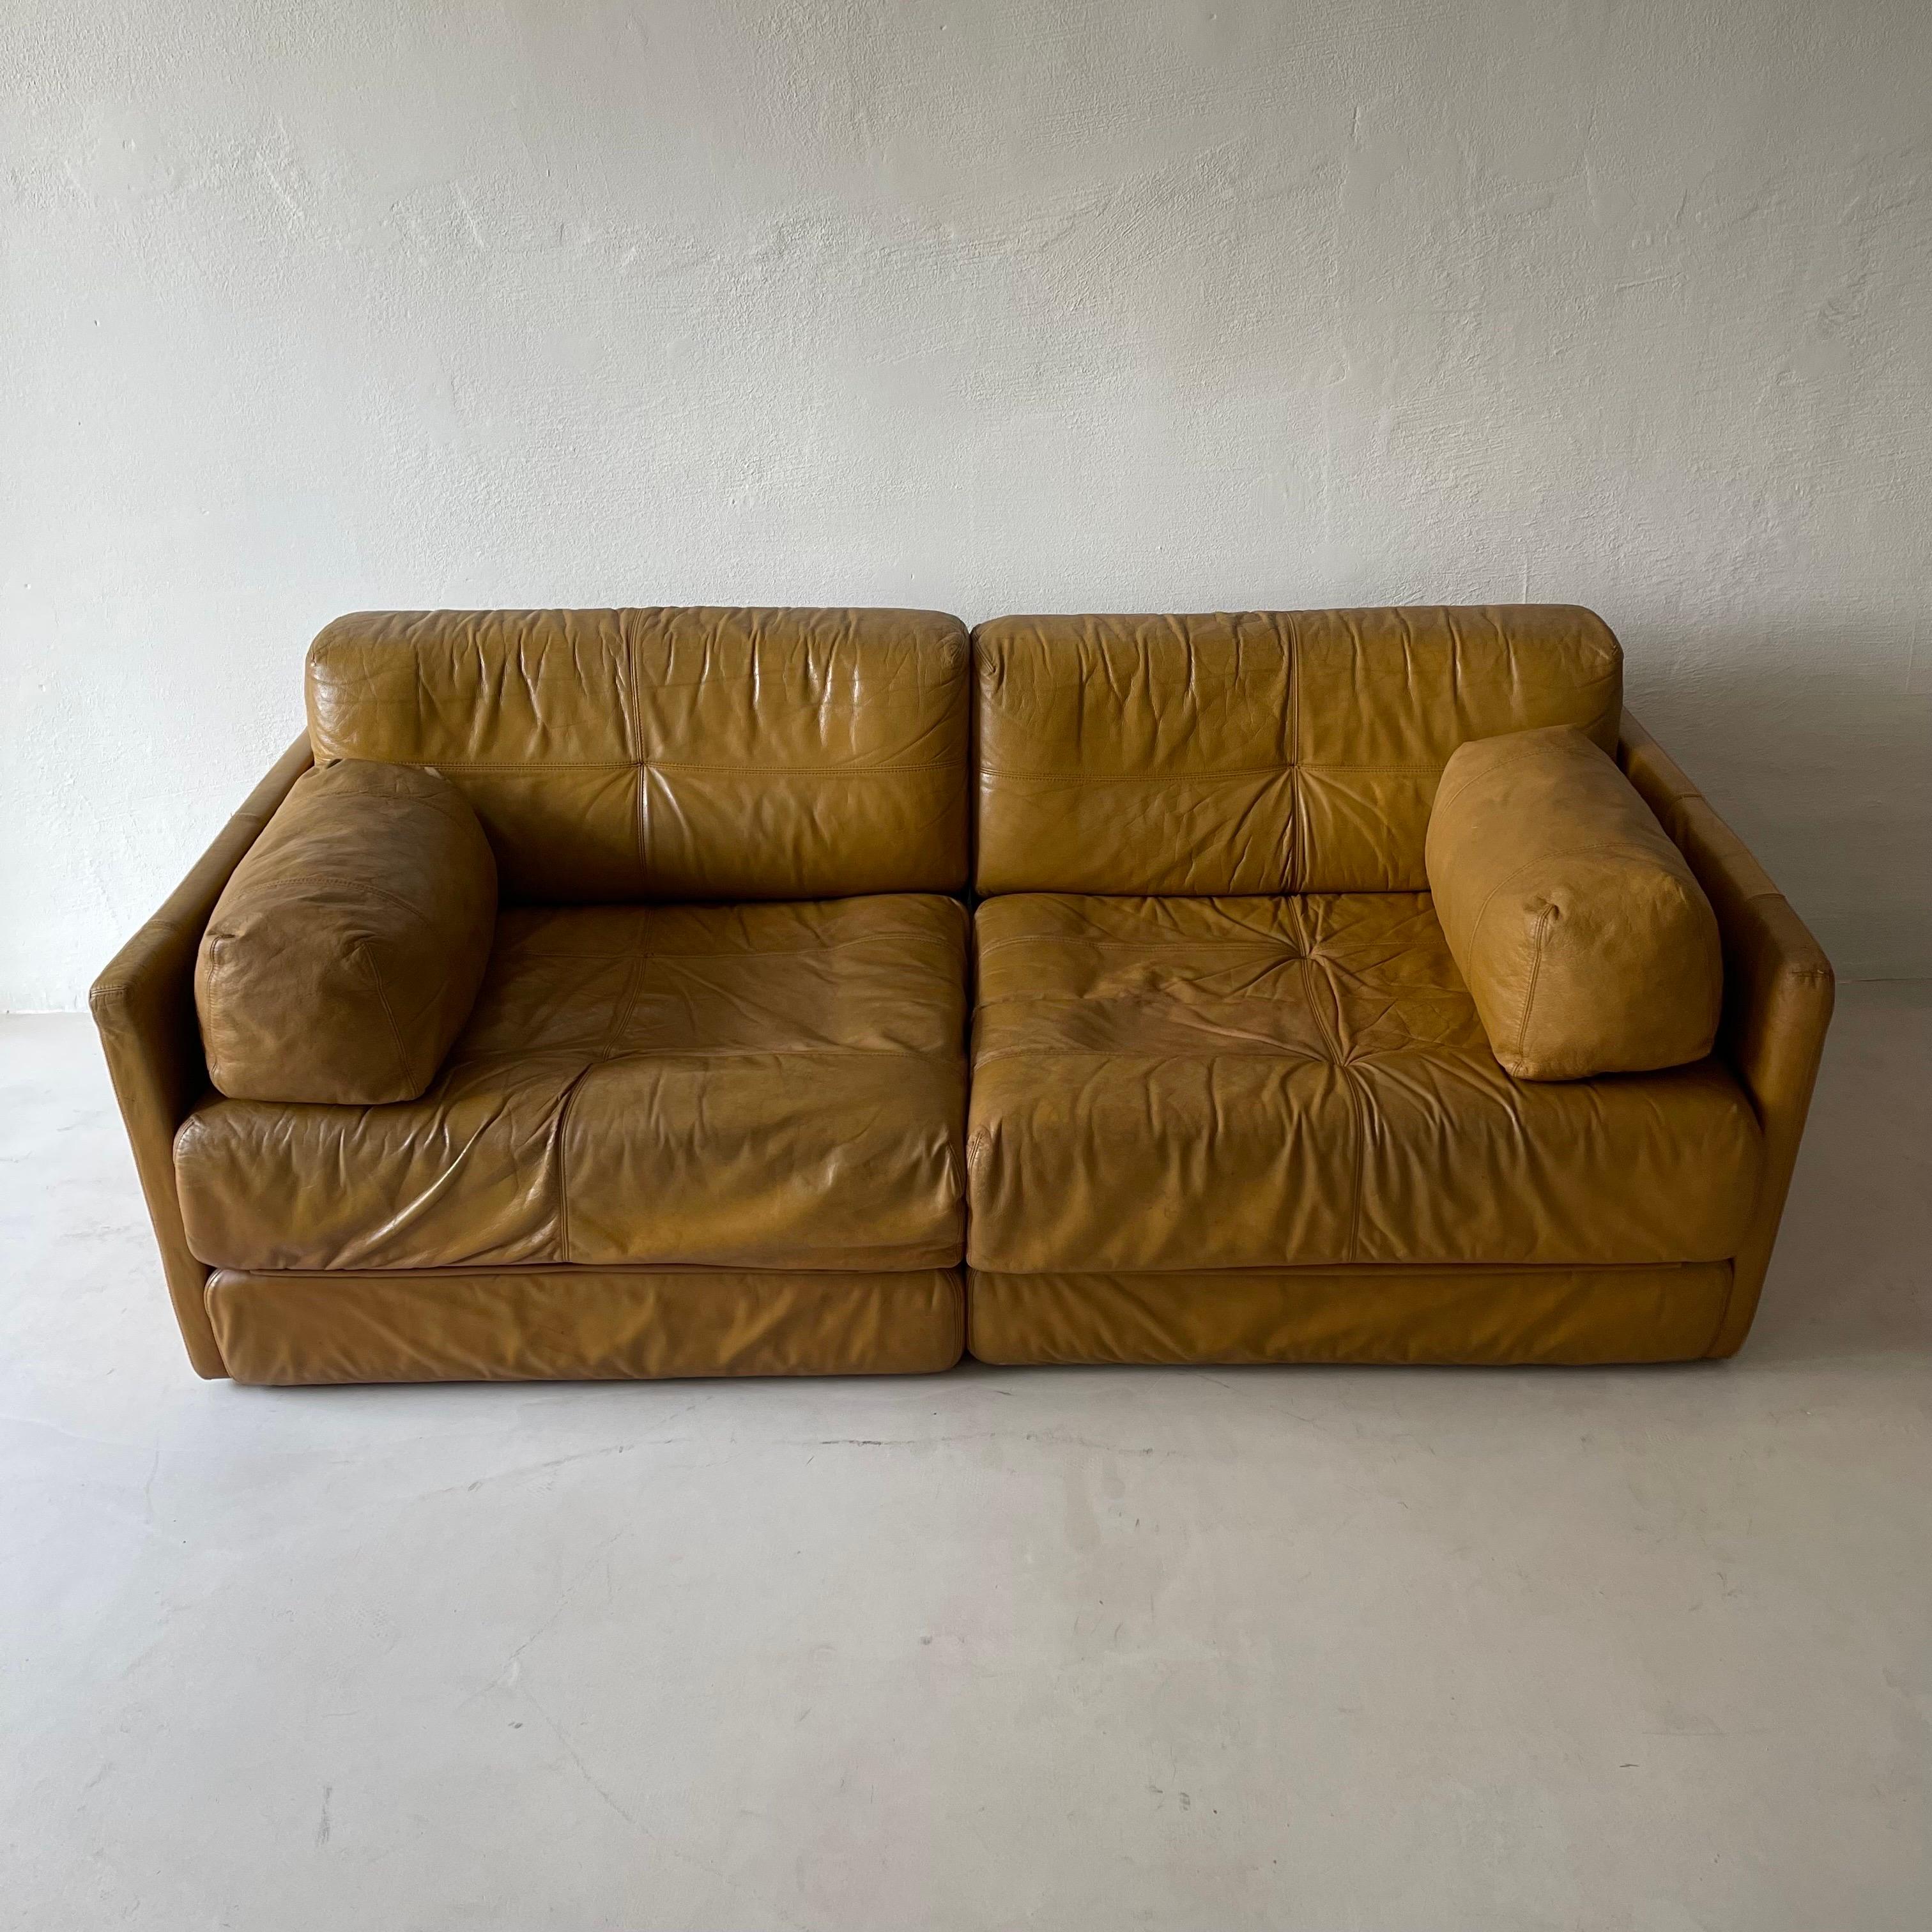 Wittmann Atrium Cognac Leather Daybed Sofa, 1970s For Sale 1